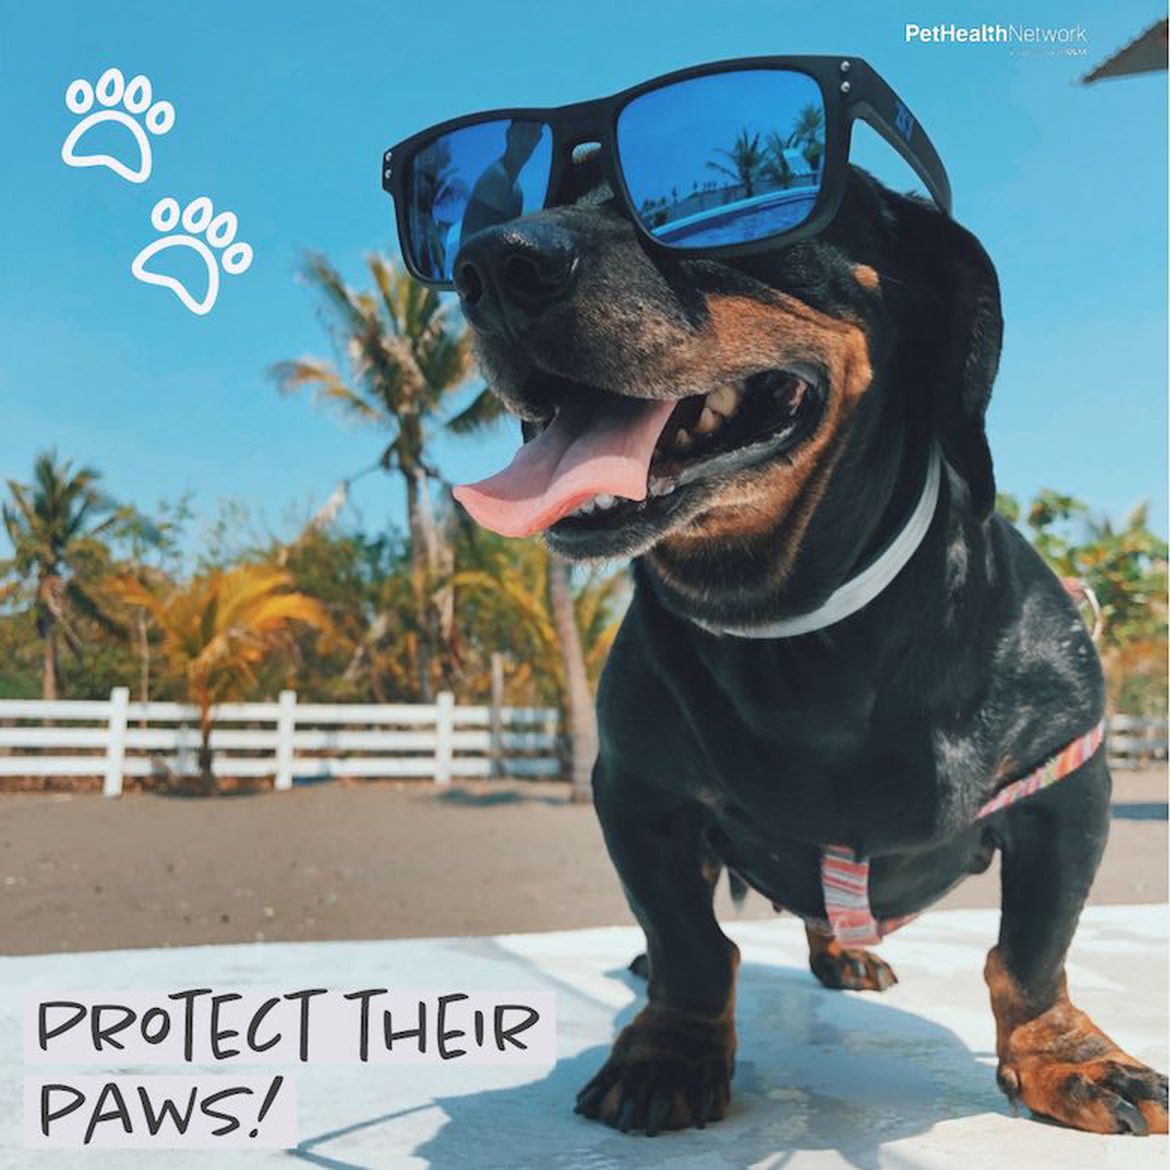 Social media post reminder to protect dogs paws in the heat.